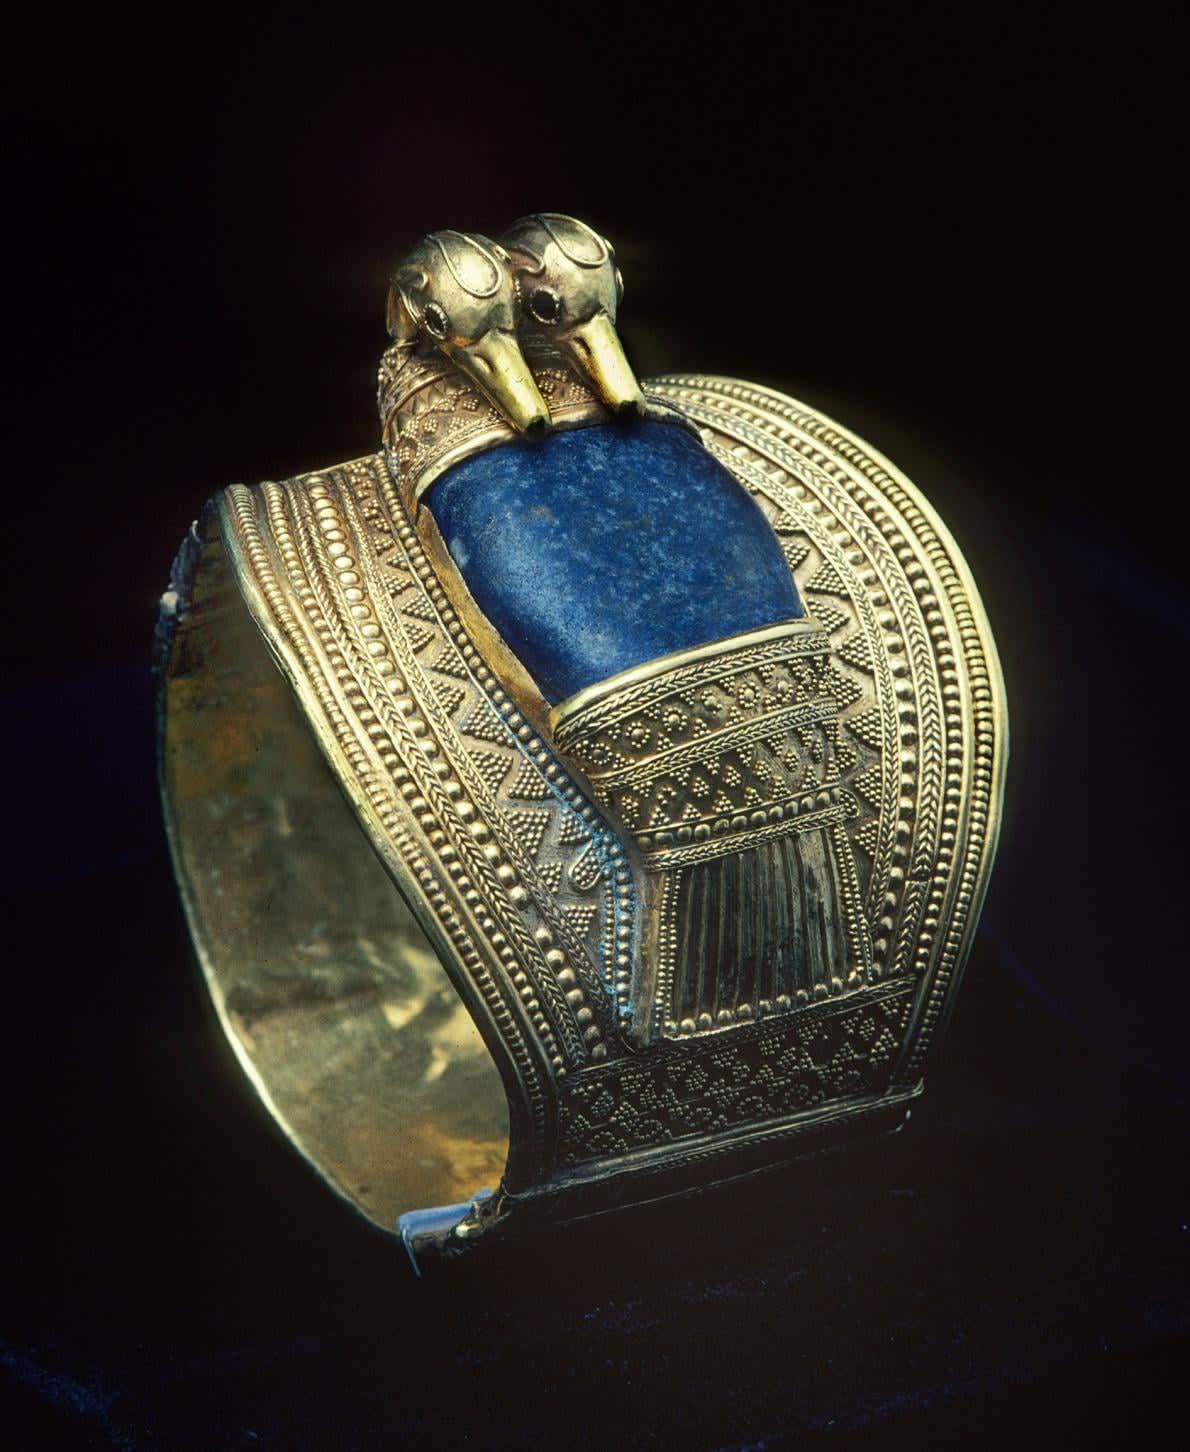 One of two bracelets that belonged to King Ramesses II, who reigned circa 1279-1213 BCE under the 19th Dynasty, Pharaonic Egypt